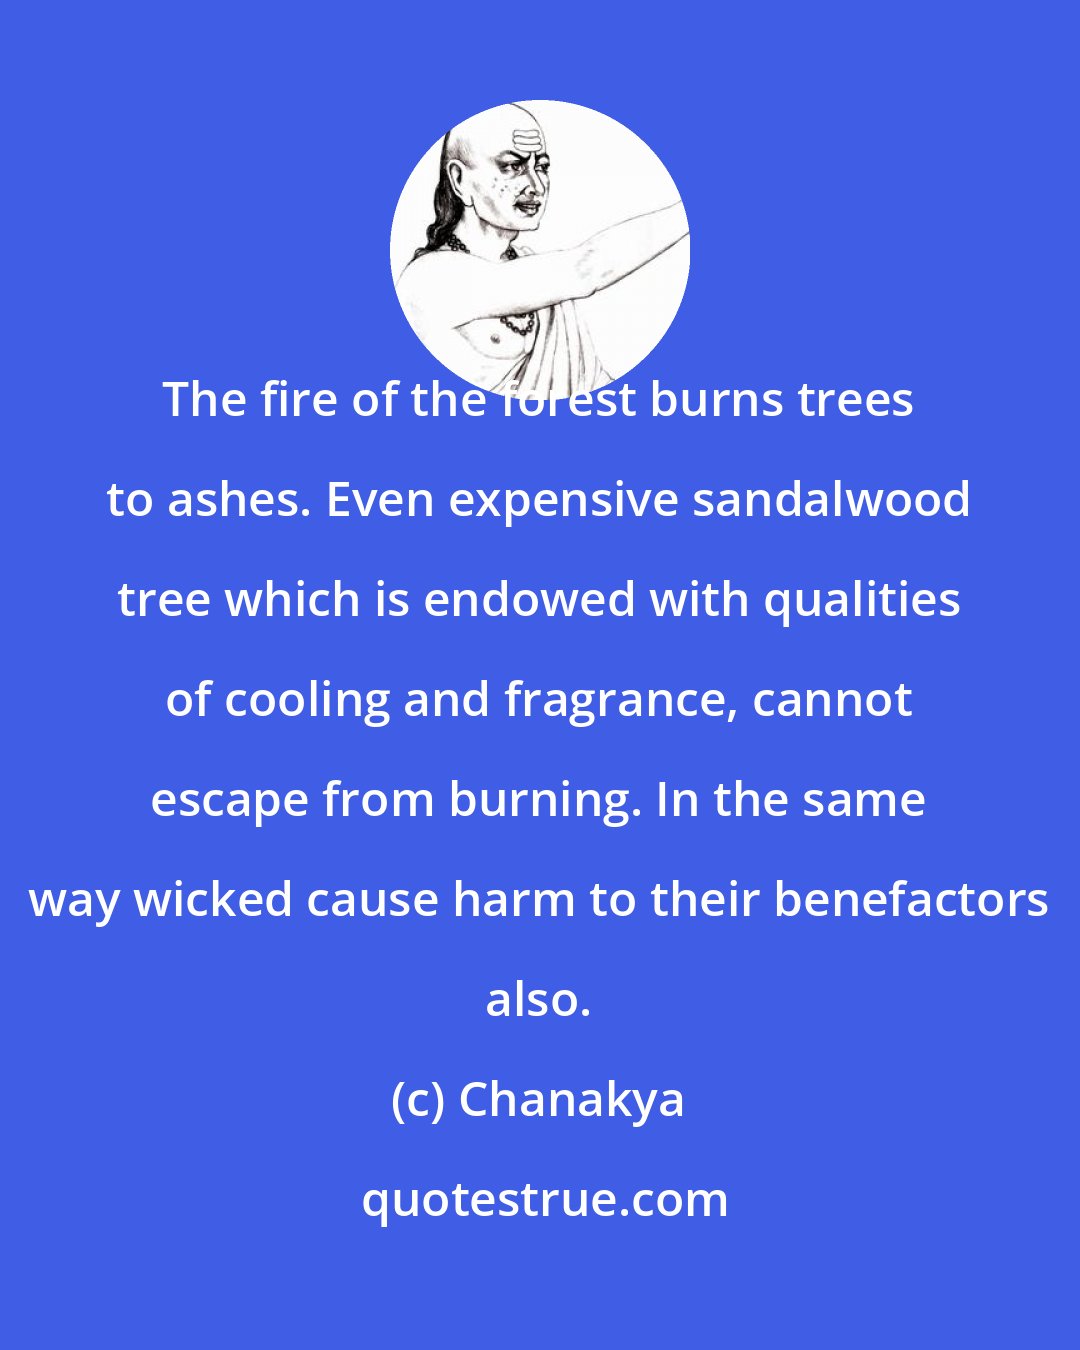 Chanakya: The fire of the forest burns trees to ashes. Even expensive sandalwood tree which is endowed with qualities of cooling and fragrance, cannot escape from burning. In the same way wicked cause harm to their benefactors also.